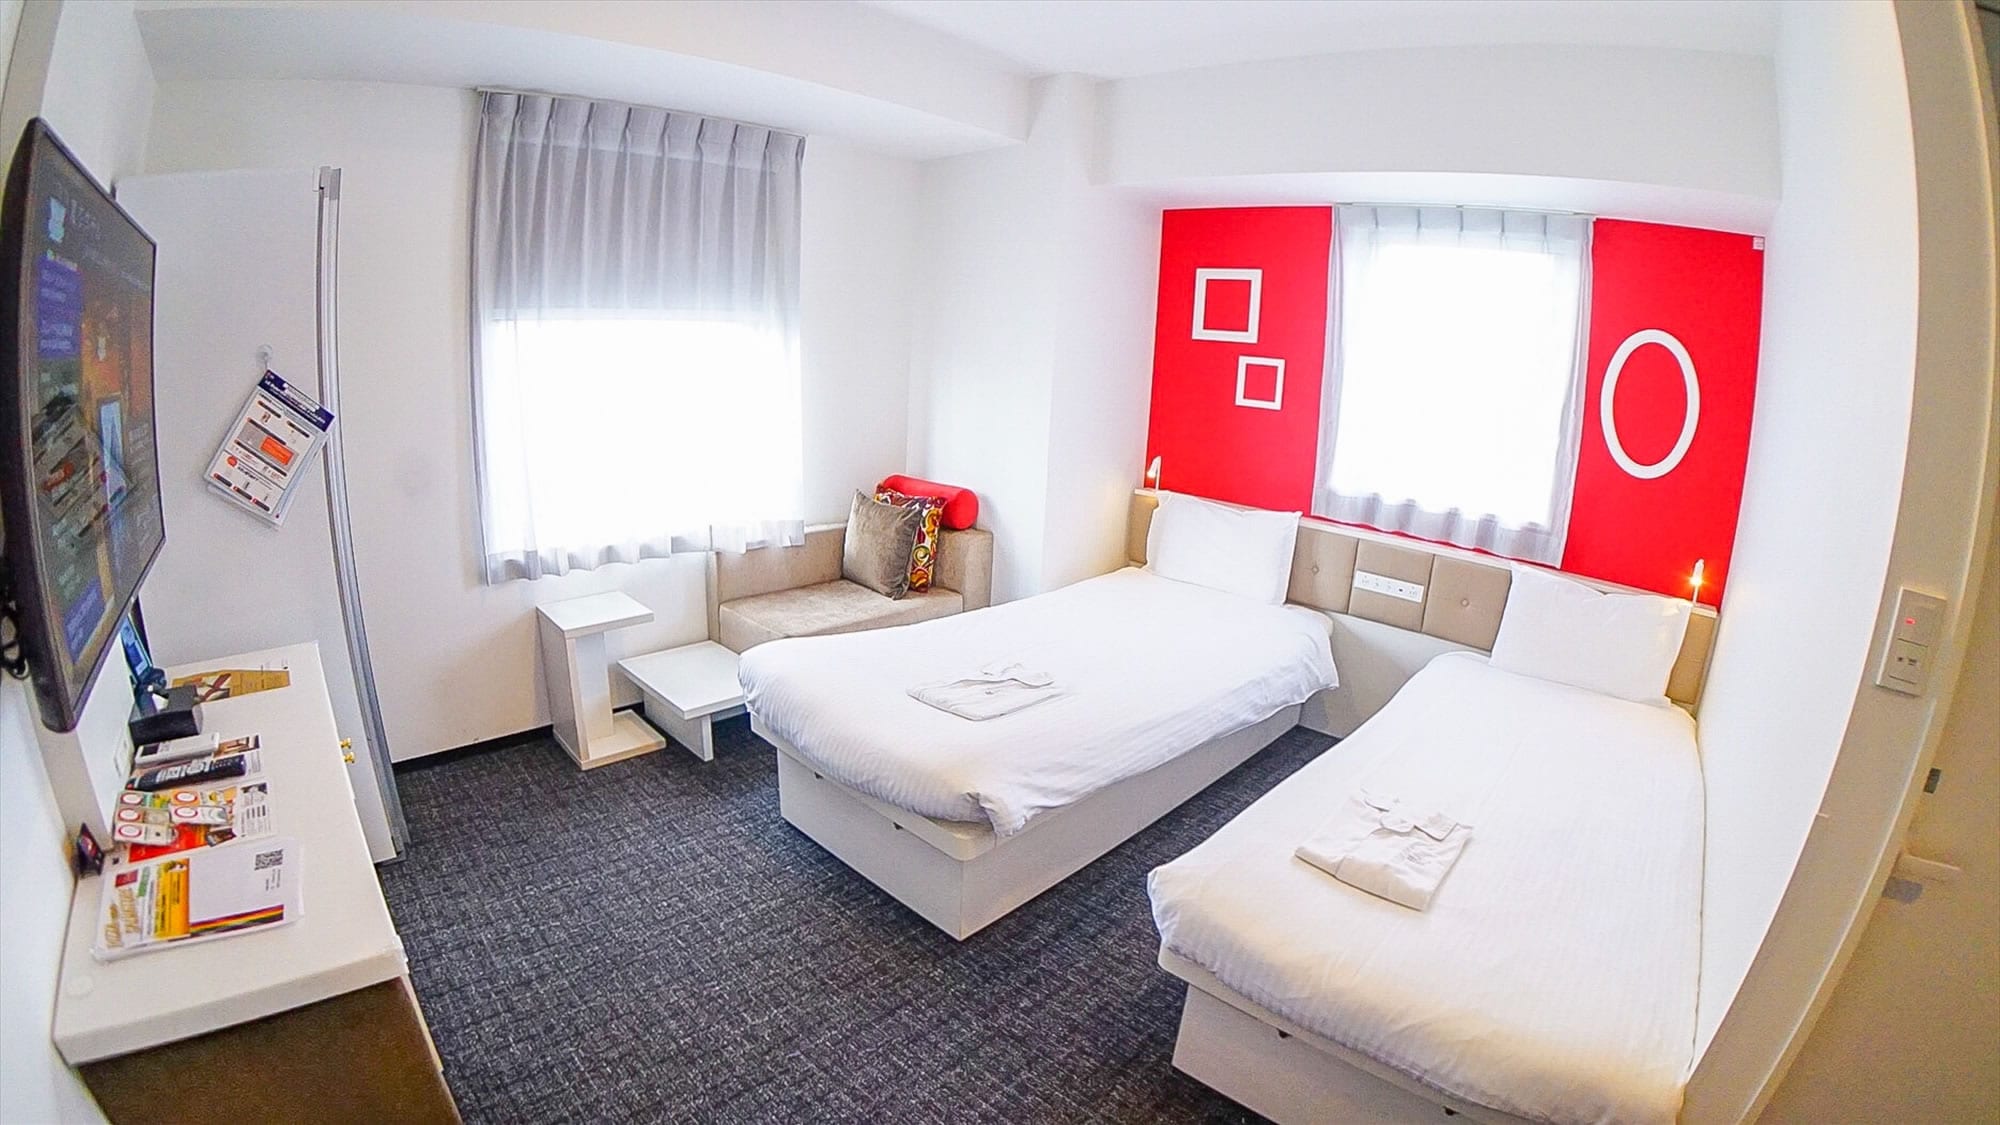  [Standard Twin Room] 2 adults + 1 bed-sharing person can stay in a separate type with separate beds